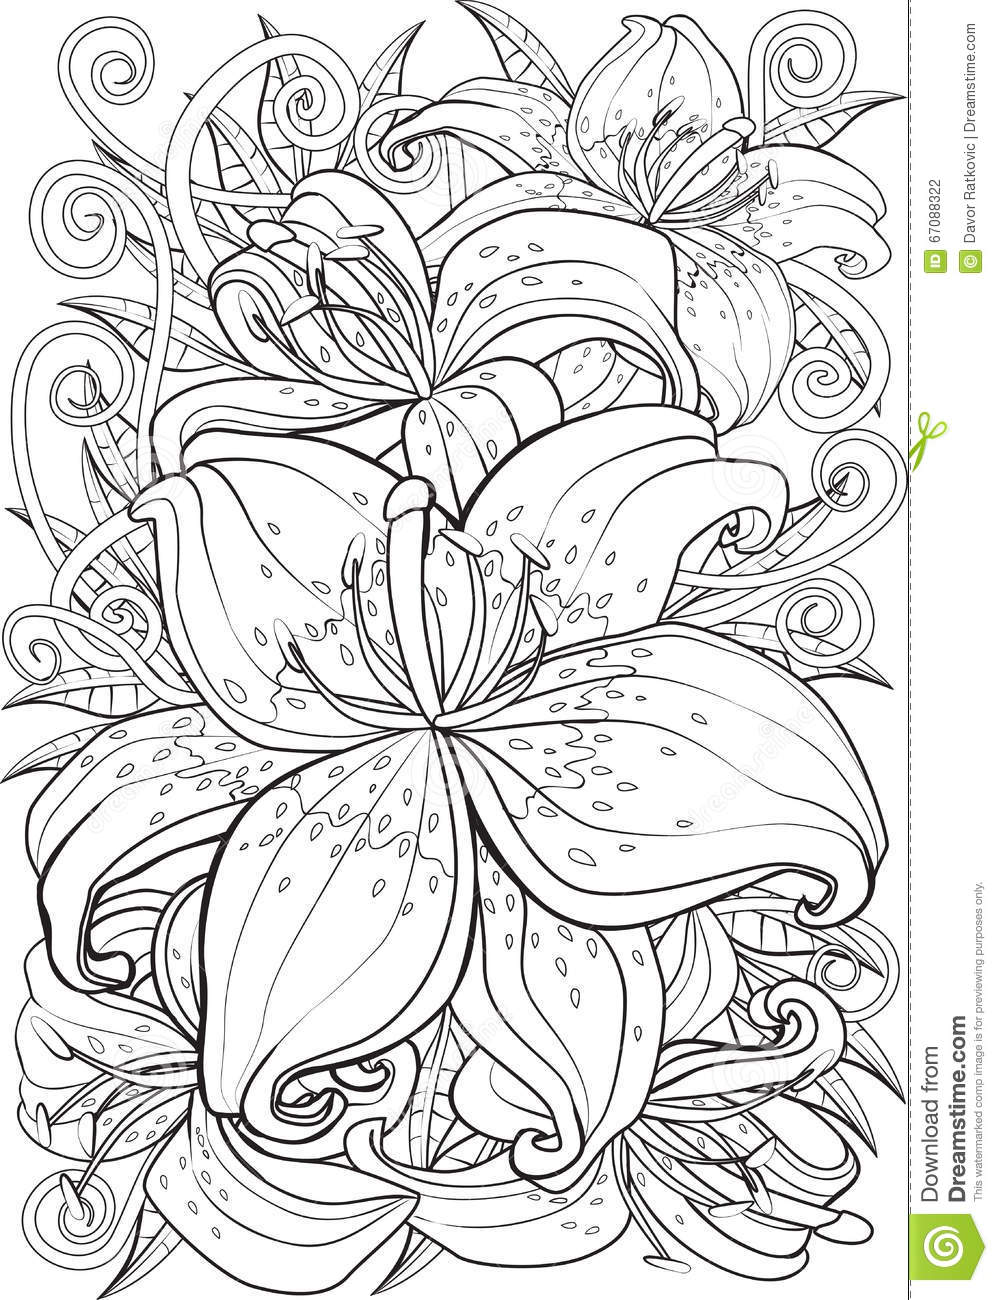 Tiger Lily coloring #13, Download drawings